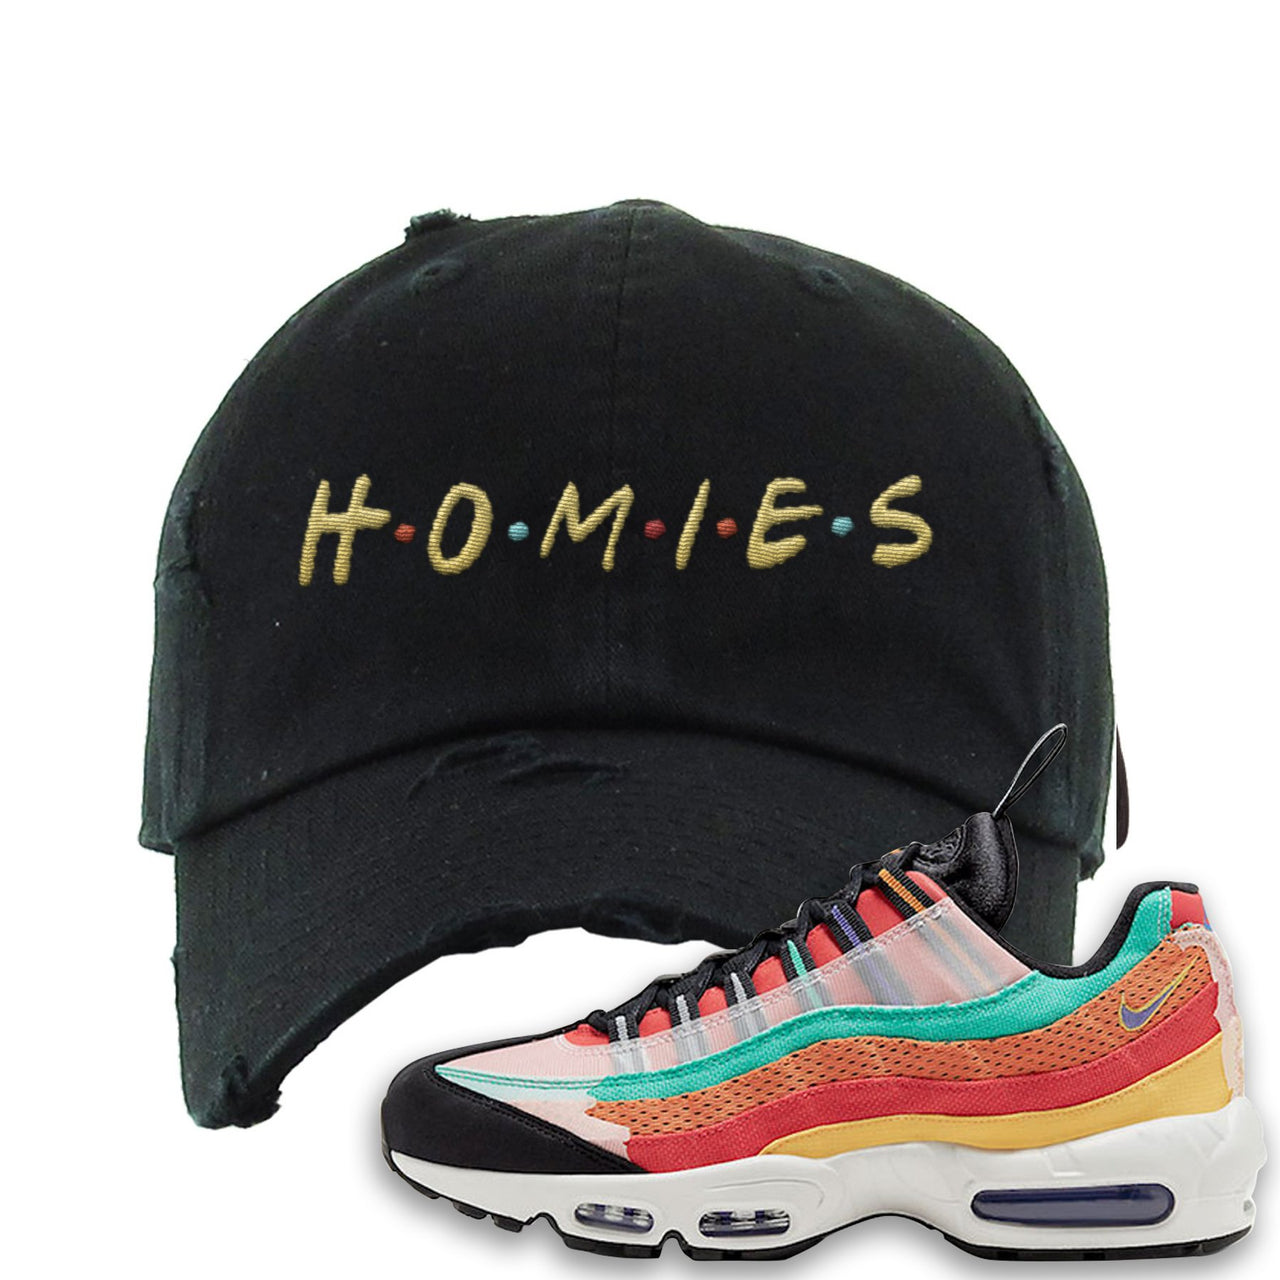 Air Max 95 Black History Month Sneaker Black Distressed Dad Hat | Hat to match Air Max 95 Black History Month Shoes | Homies